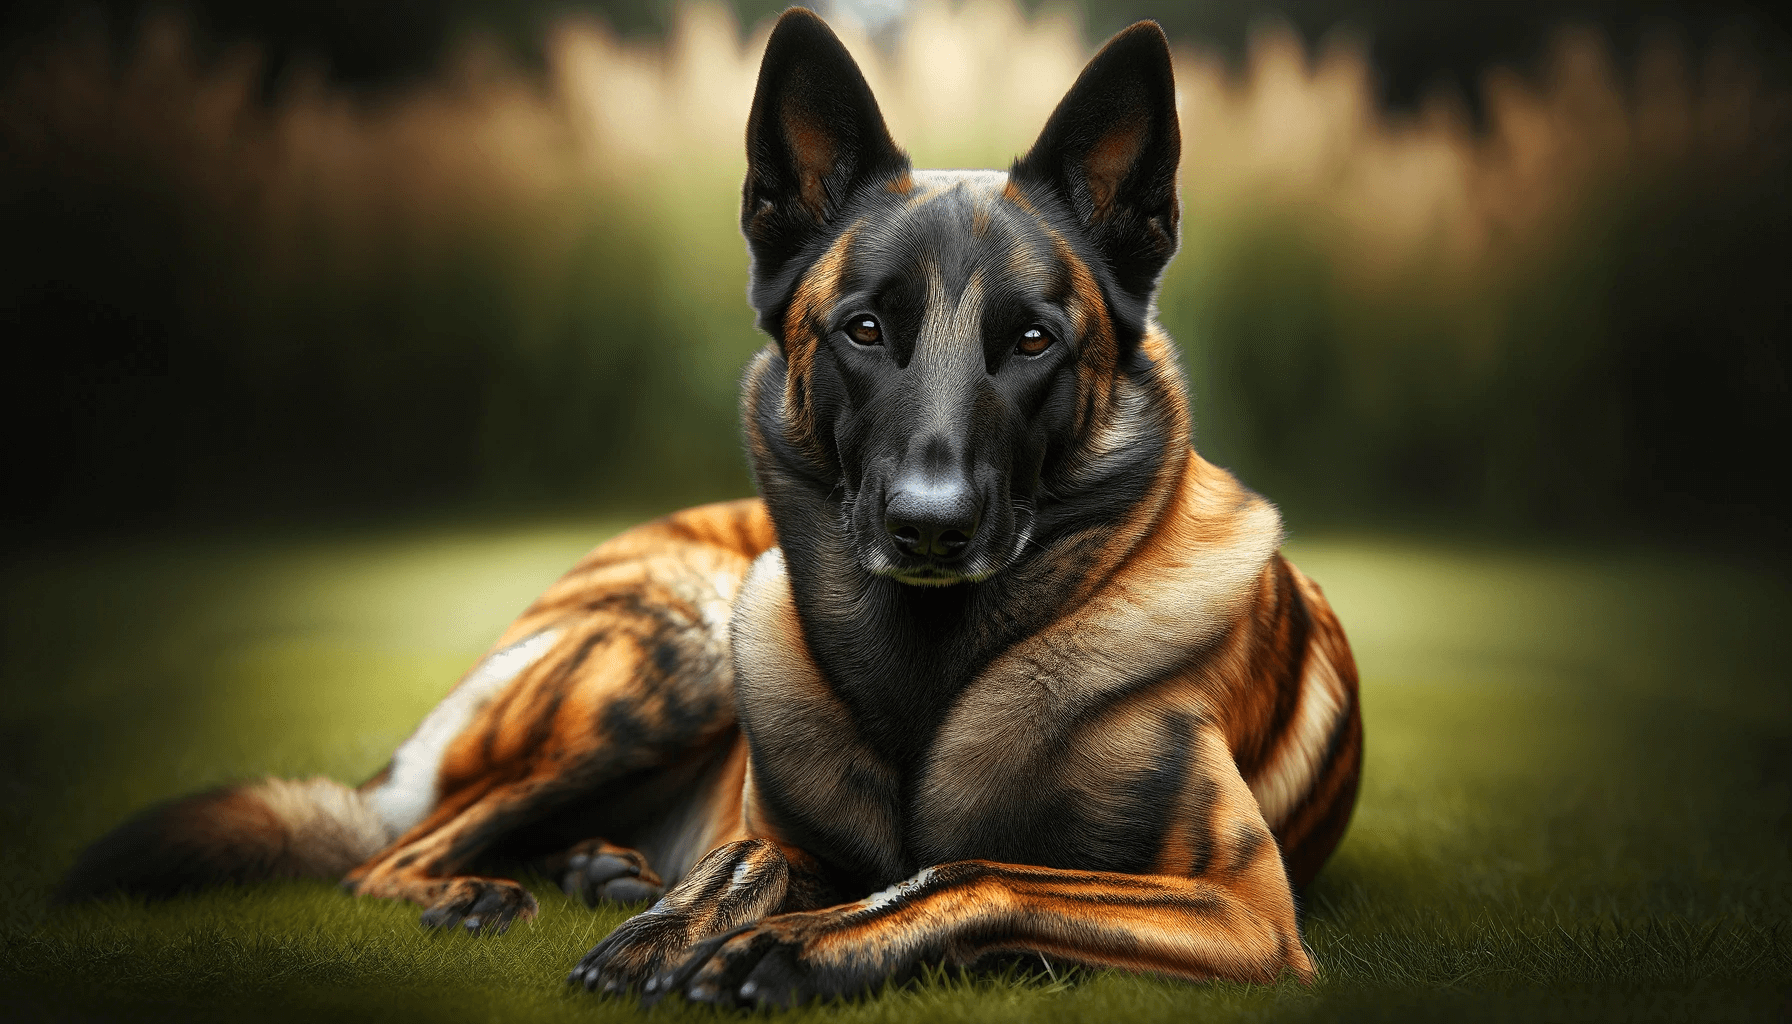 Rare Black Belgian Malinois lying down with a brindle coat, which includes a mix of black, brown, and tan colors.